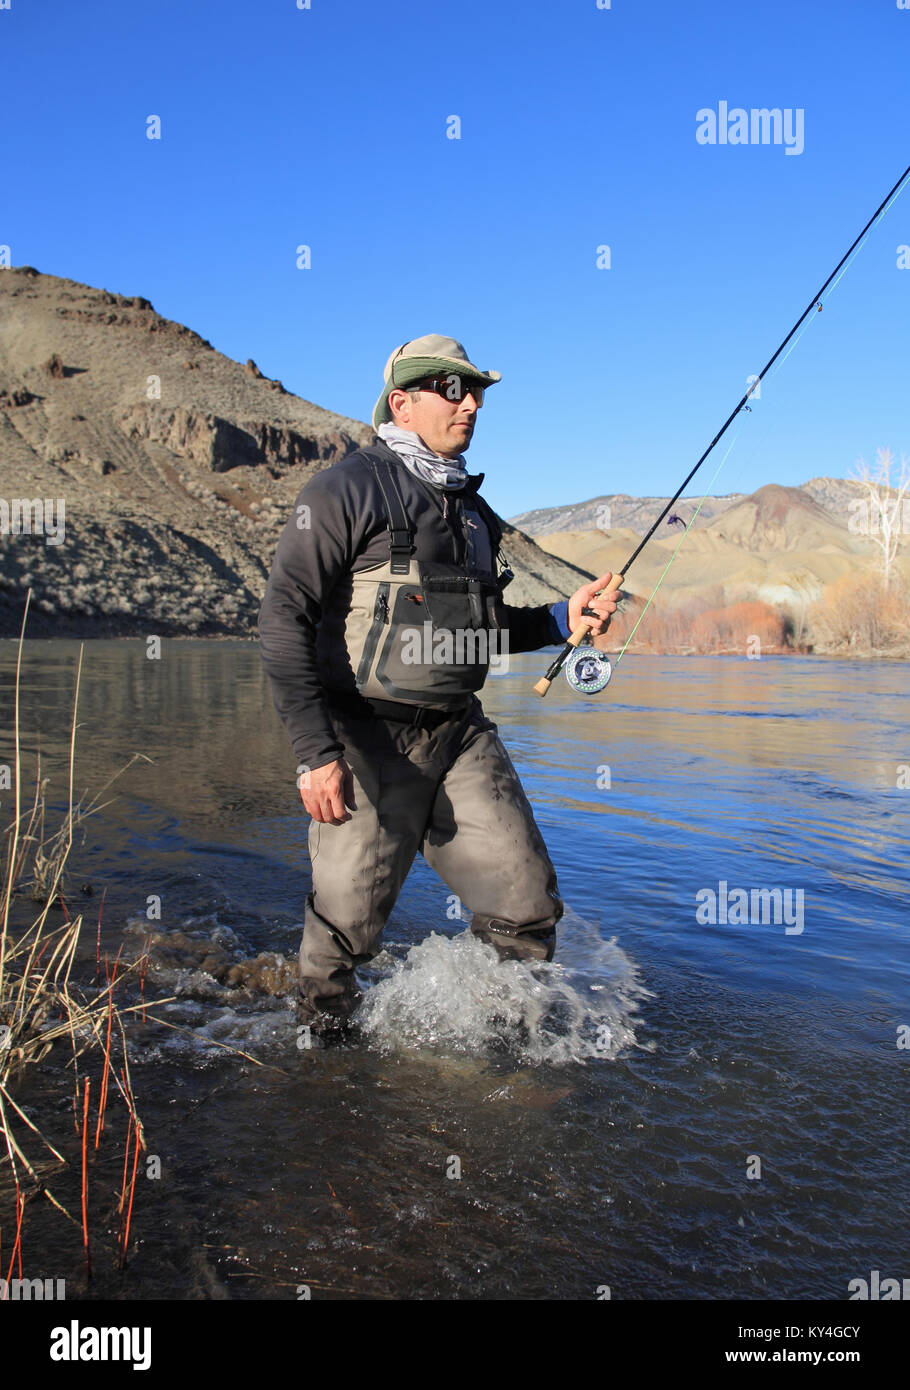 fisherman wading in river with fly rod Stock Photo